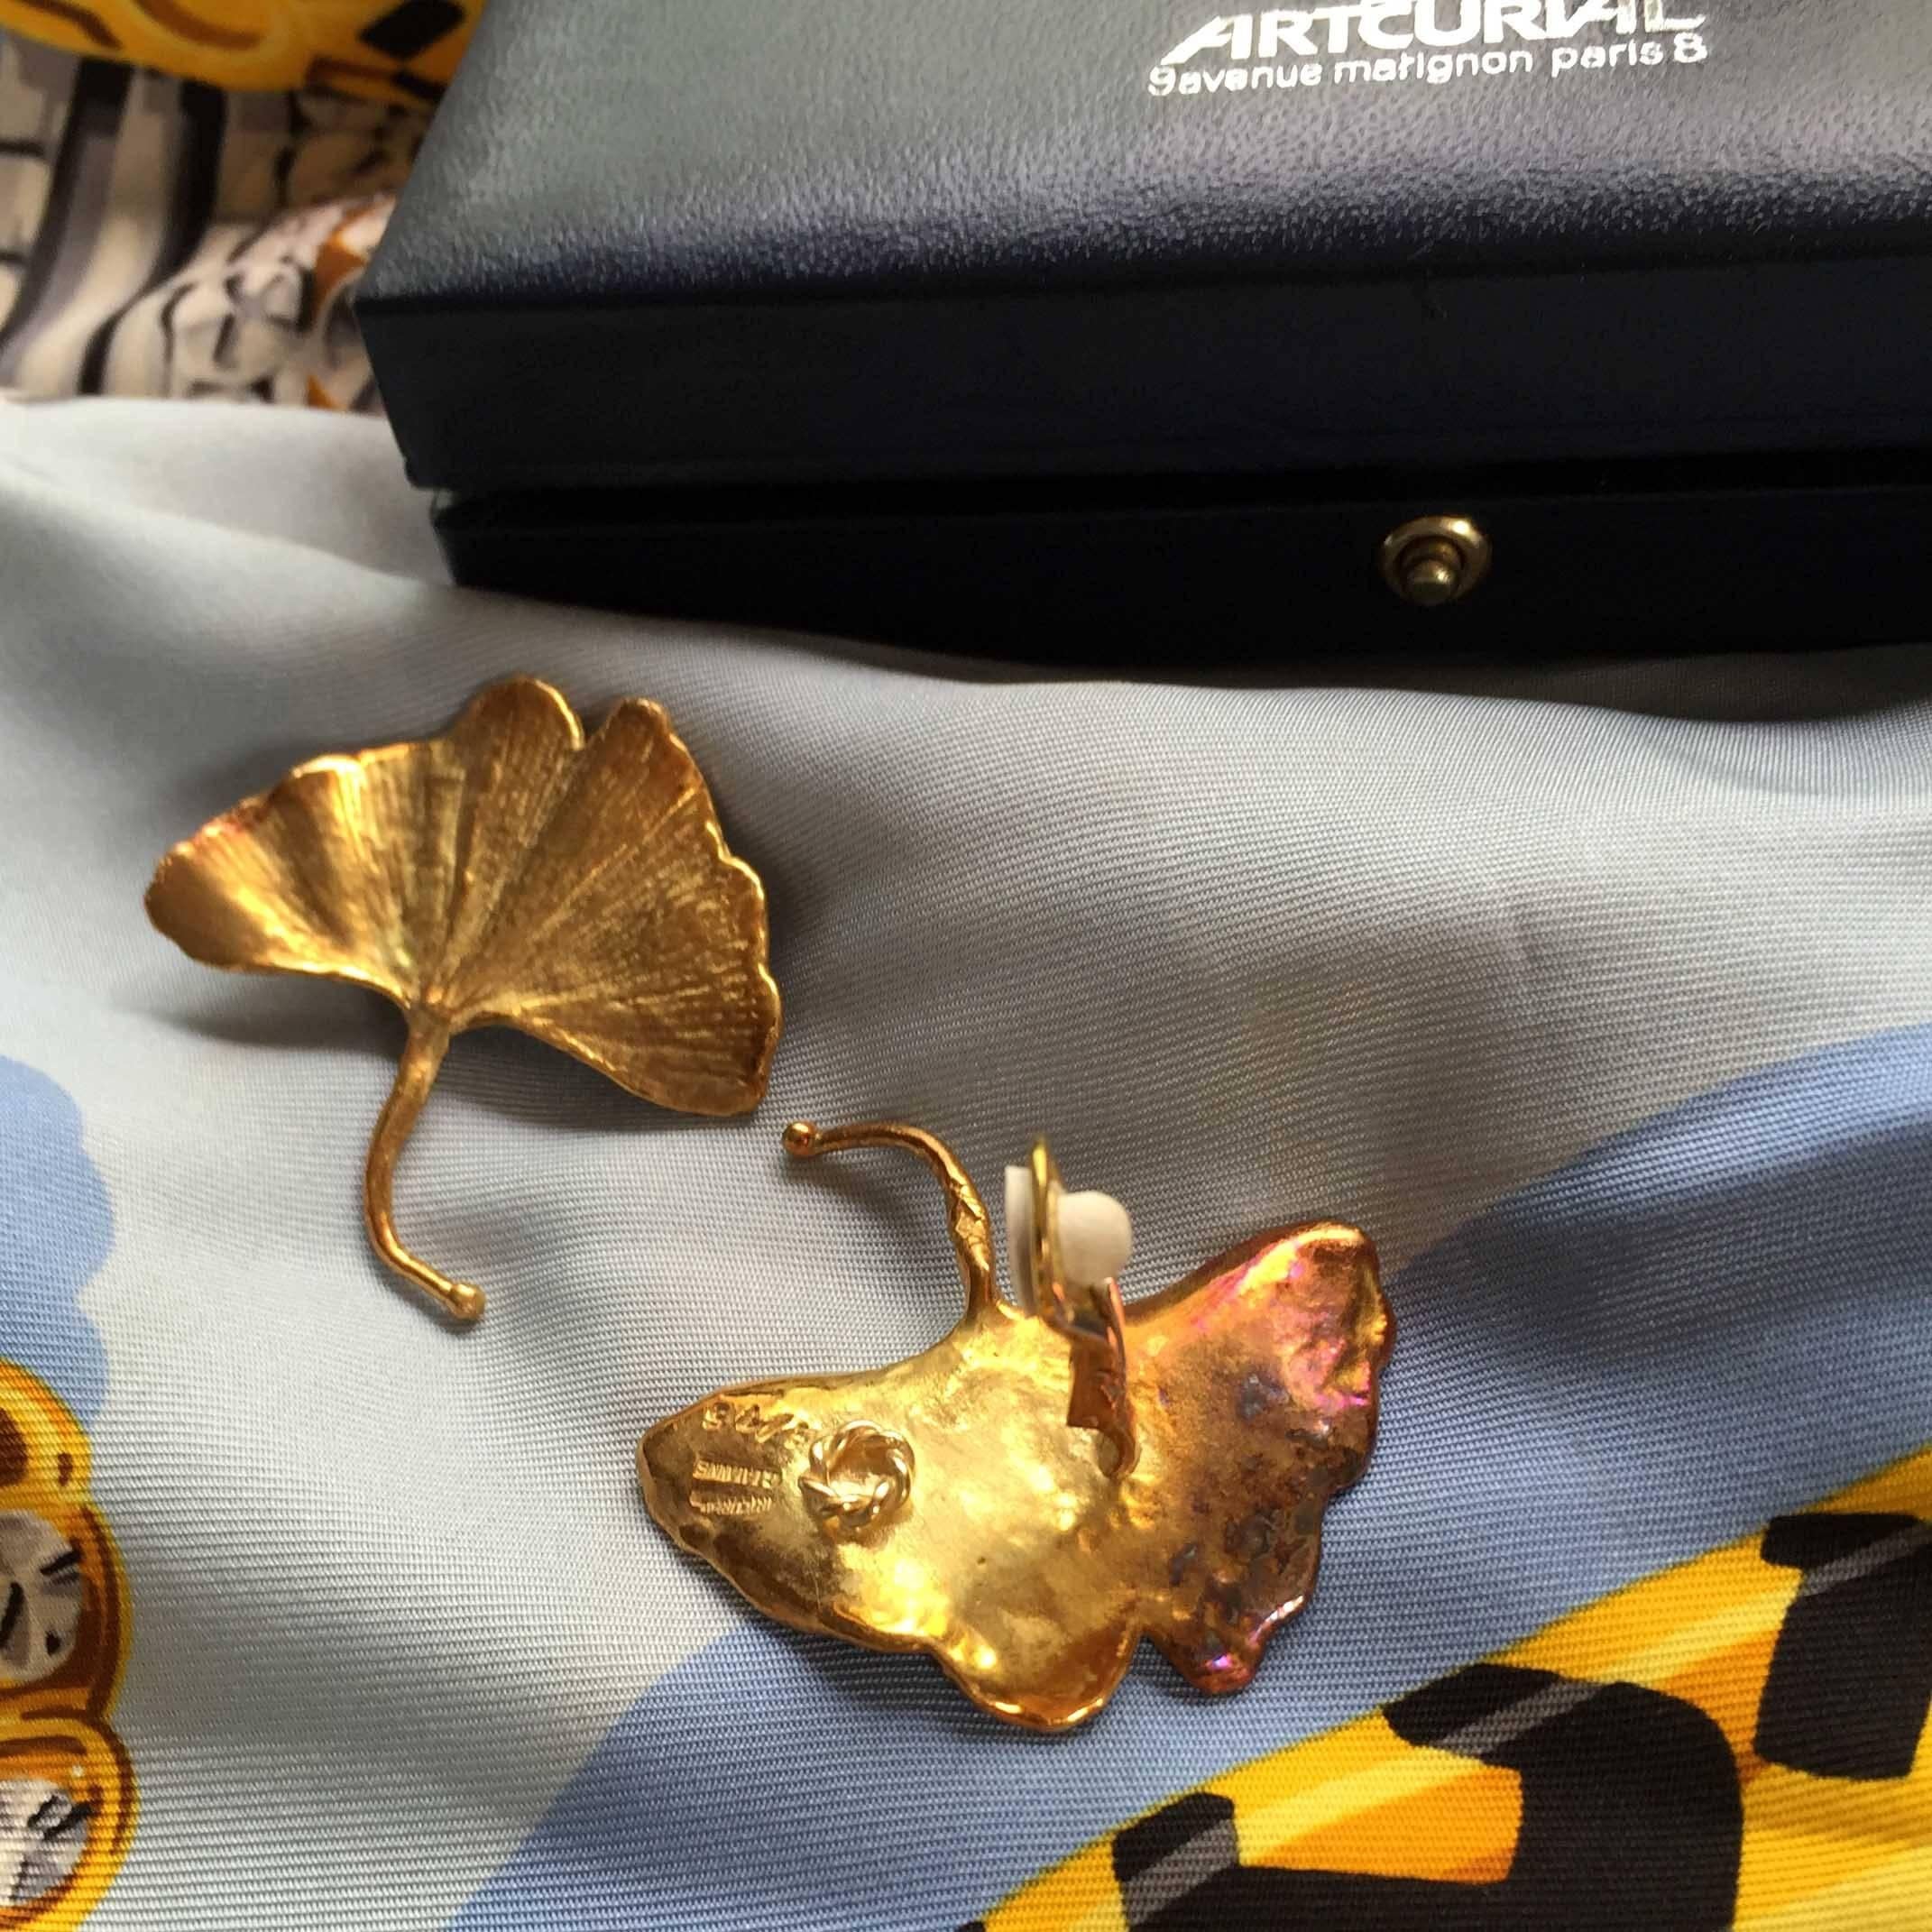 *Important Jewelry*

CLAUDE LALANNE GINGKO EARRINGS IN ARTCURIAL BOX
Circa: 1980
Place of Origin: France
Artist: CLAUDE LALANNE (French, 1924 - )
HANDMADE
From the artist's OWN PERSONAL COLLECTION. 
Numbered 9/75 
Material: metal
Condition: